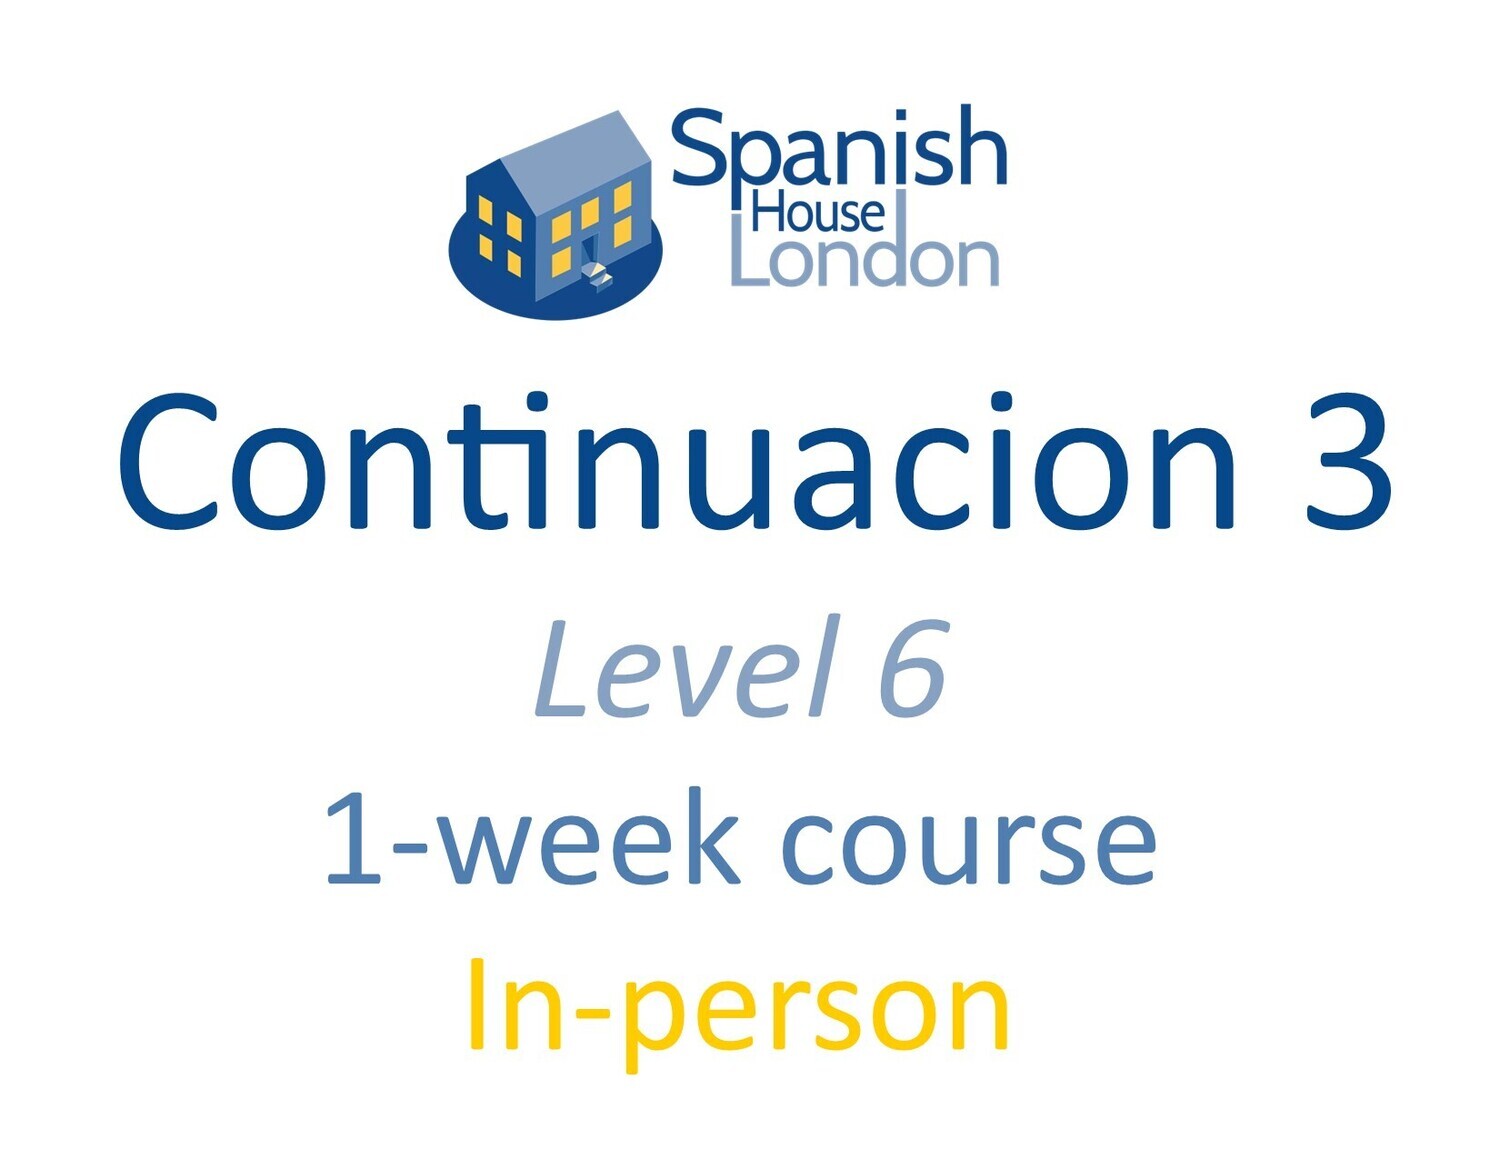 One-Week Intensive Continuacion 3 Course starting on 11th December at 10.30am in Clapham North